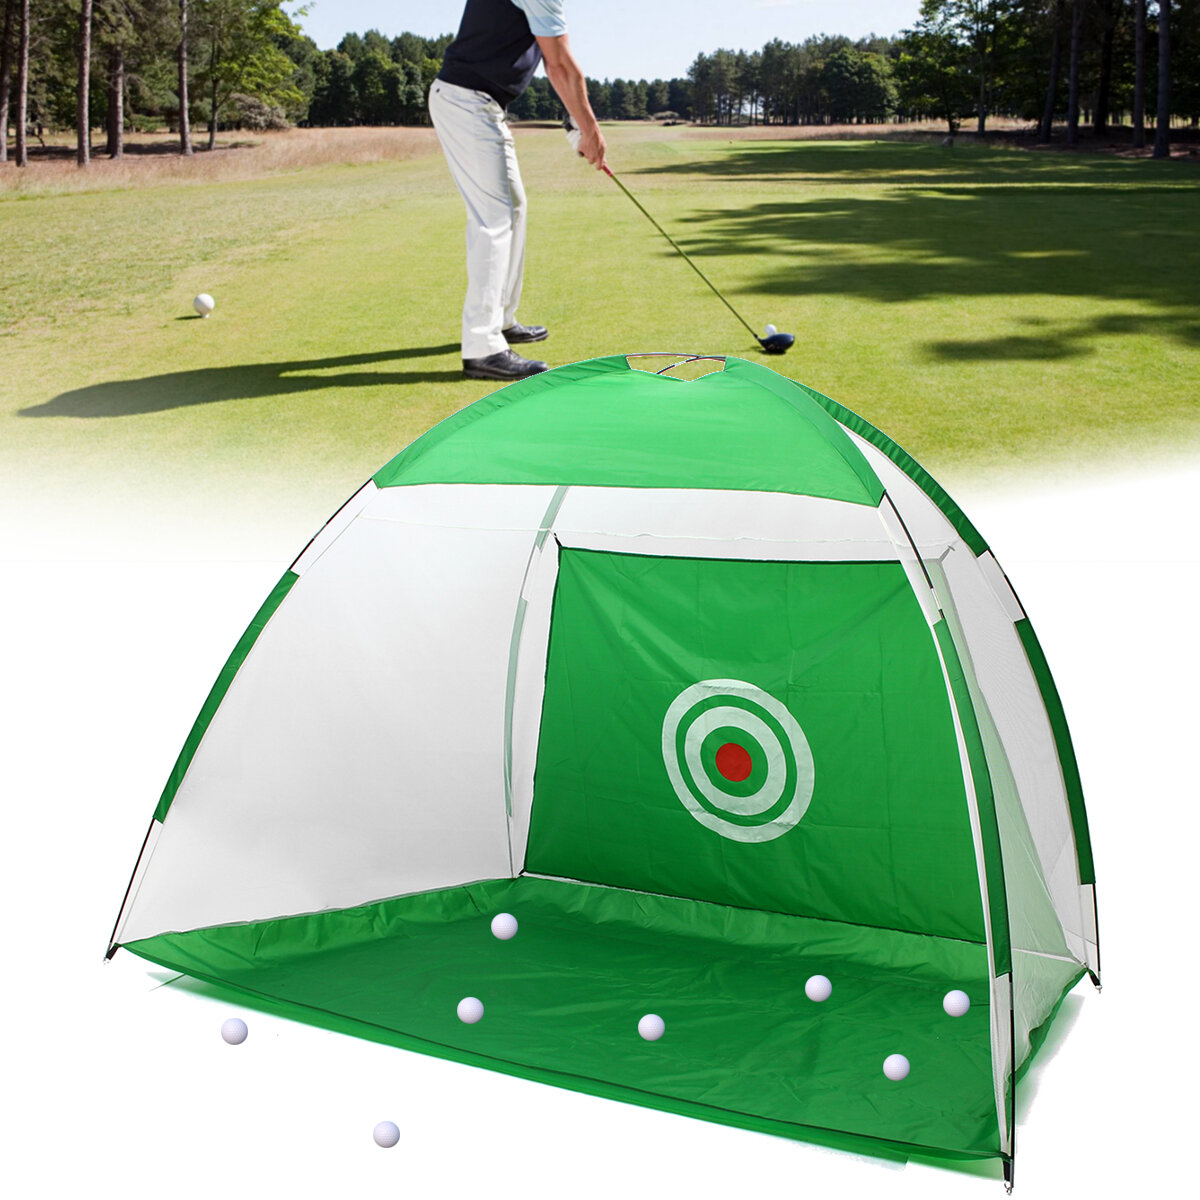 Image of 3M Golf Training Net Portable Foldable Practice Golf Chipping Net Hitting Cage Trainer Indoor Outdoor Garden Grassland T